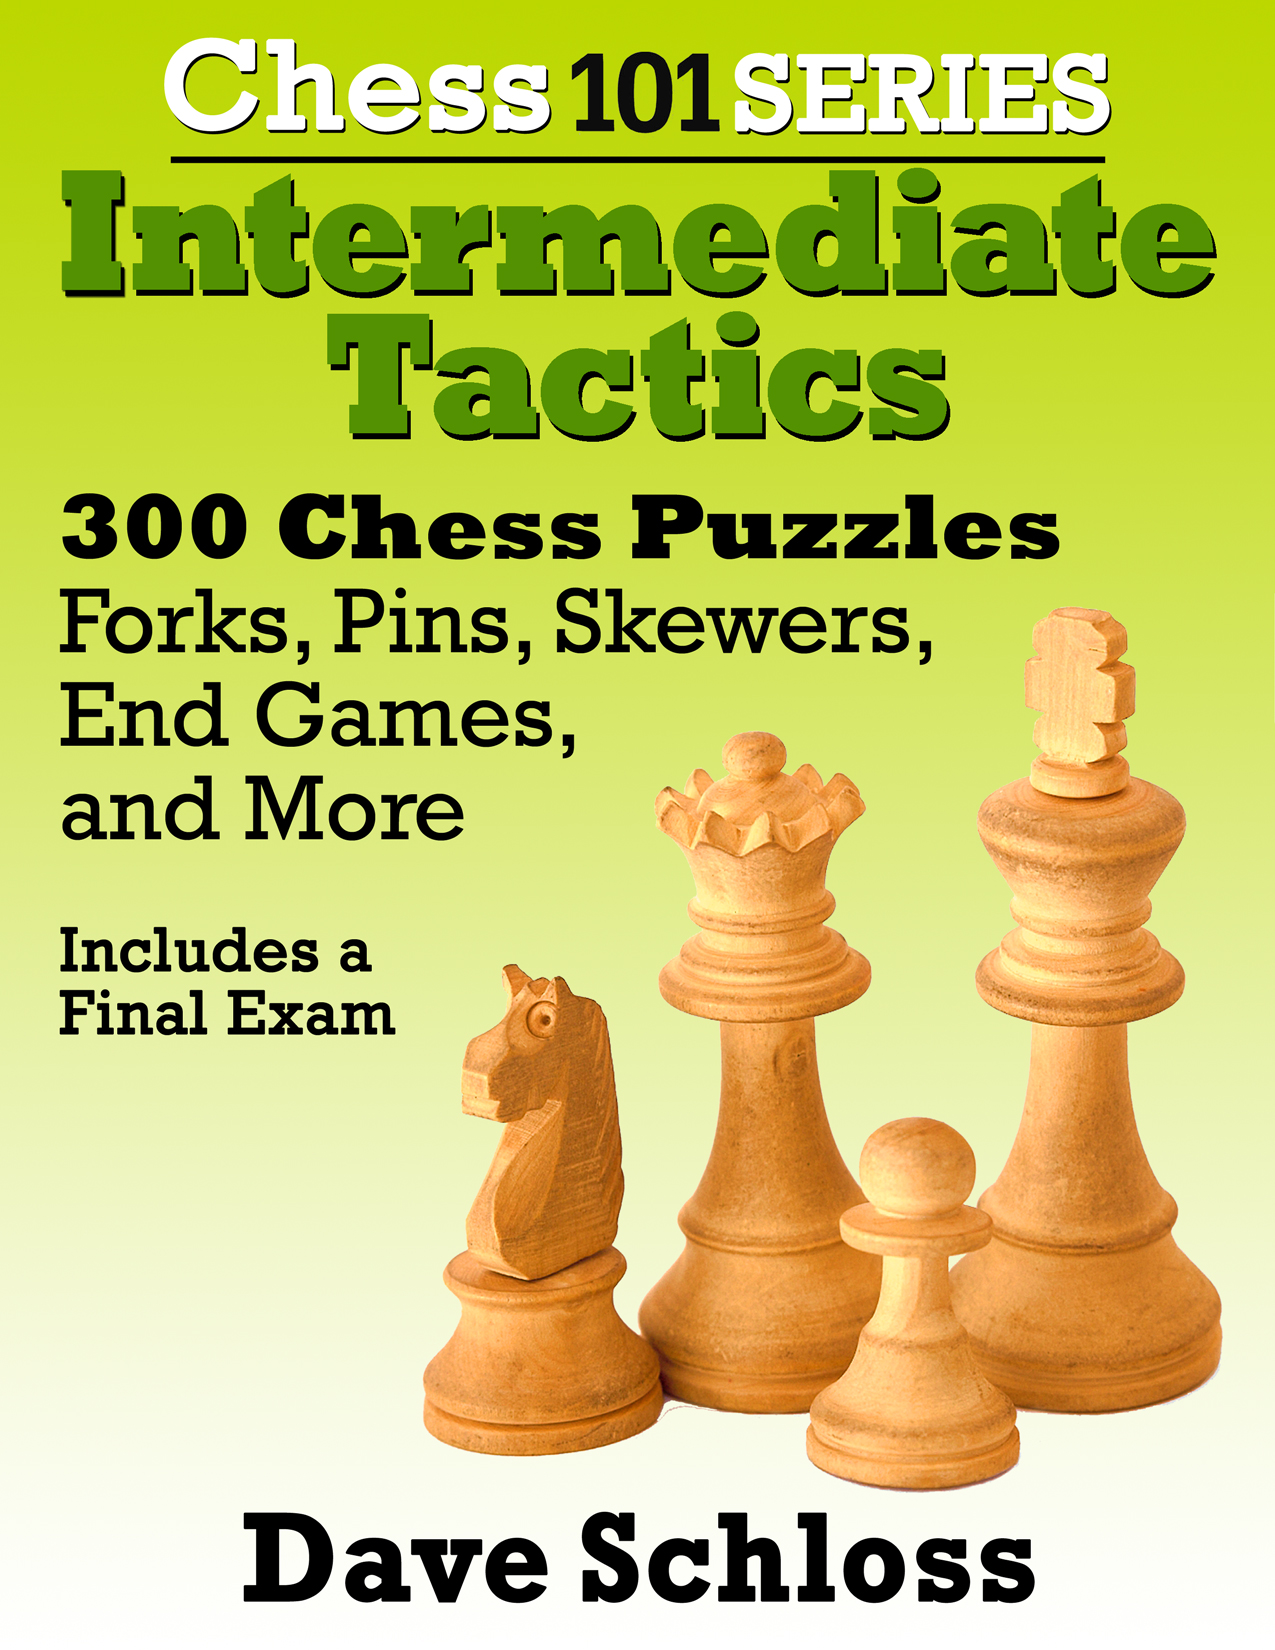 50 Challenging Chess Puzzles for Experienced Players.